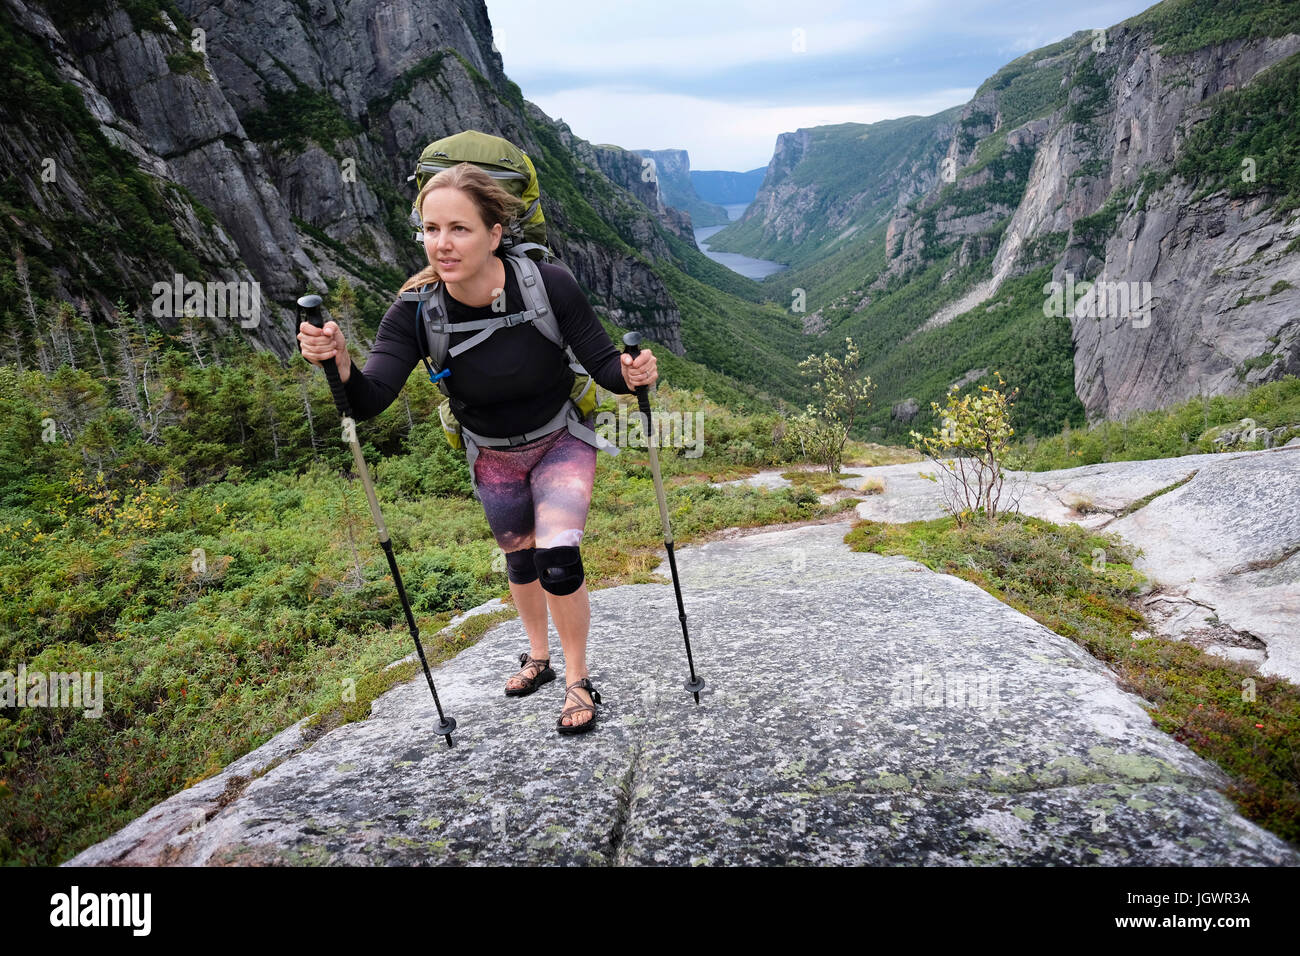 Mid adult woman hiking up rocky valley, Gros Morne National Park, Newfoundland, Canada Stock Photo